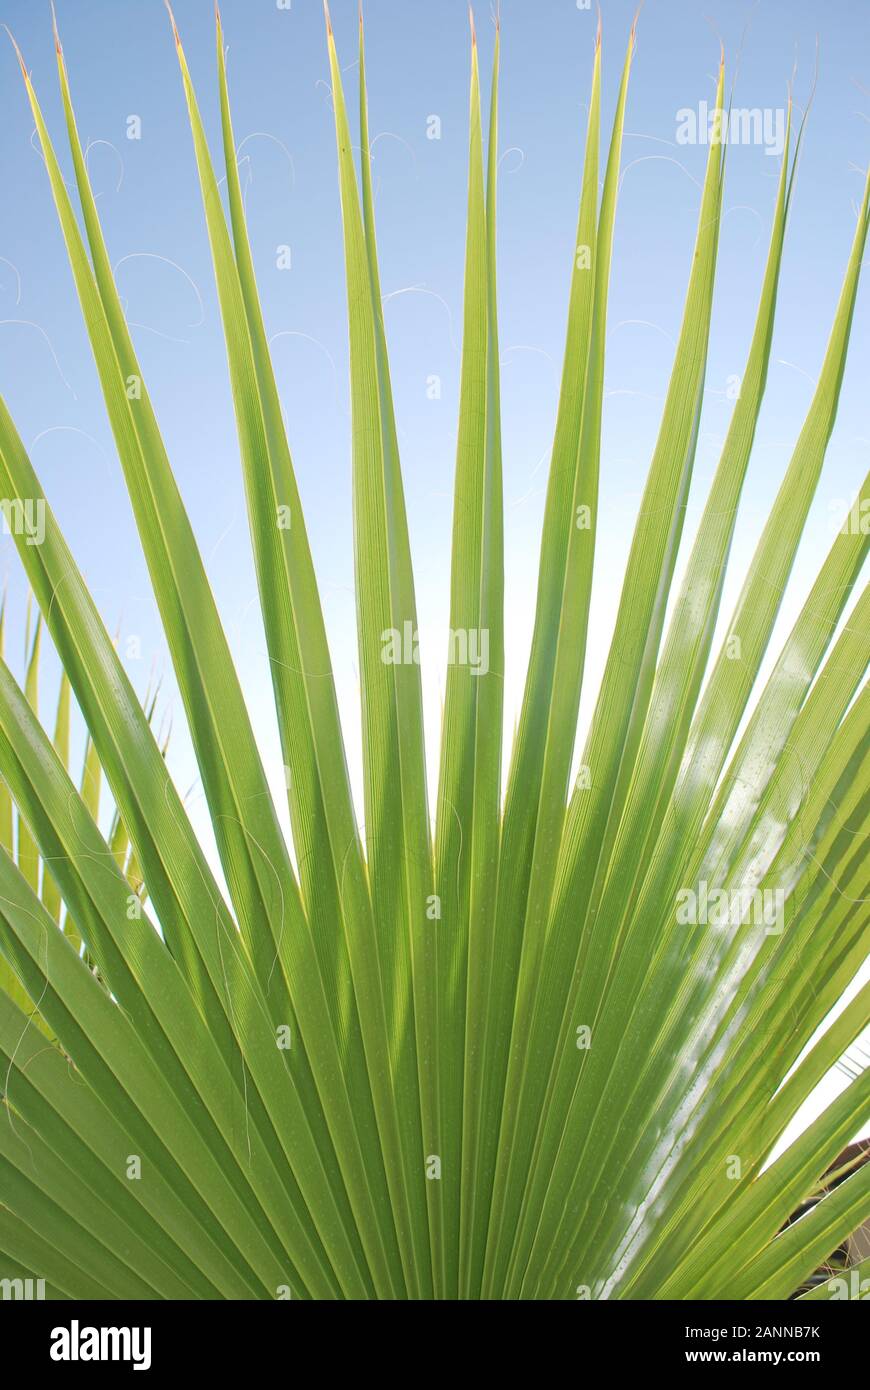 Abstract image of palm leaf in close-up highlighting the blue and green contrast with reflections of sunlight Stock Photo